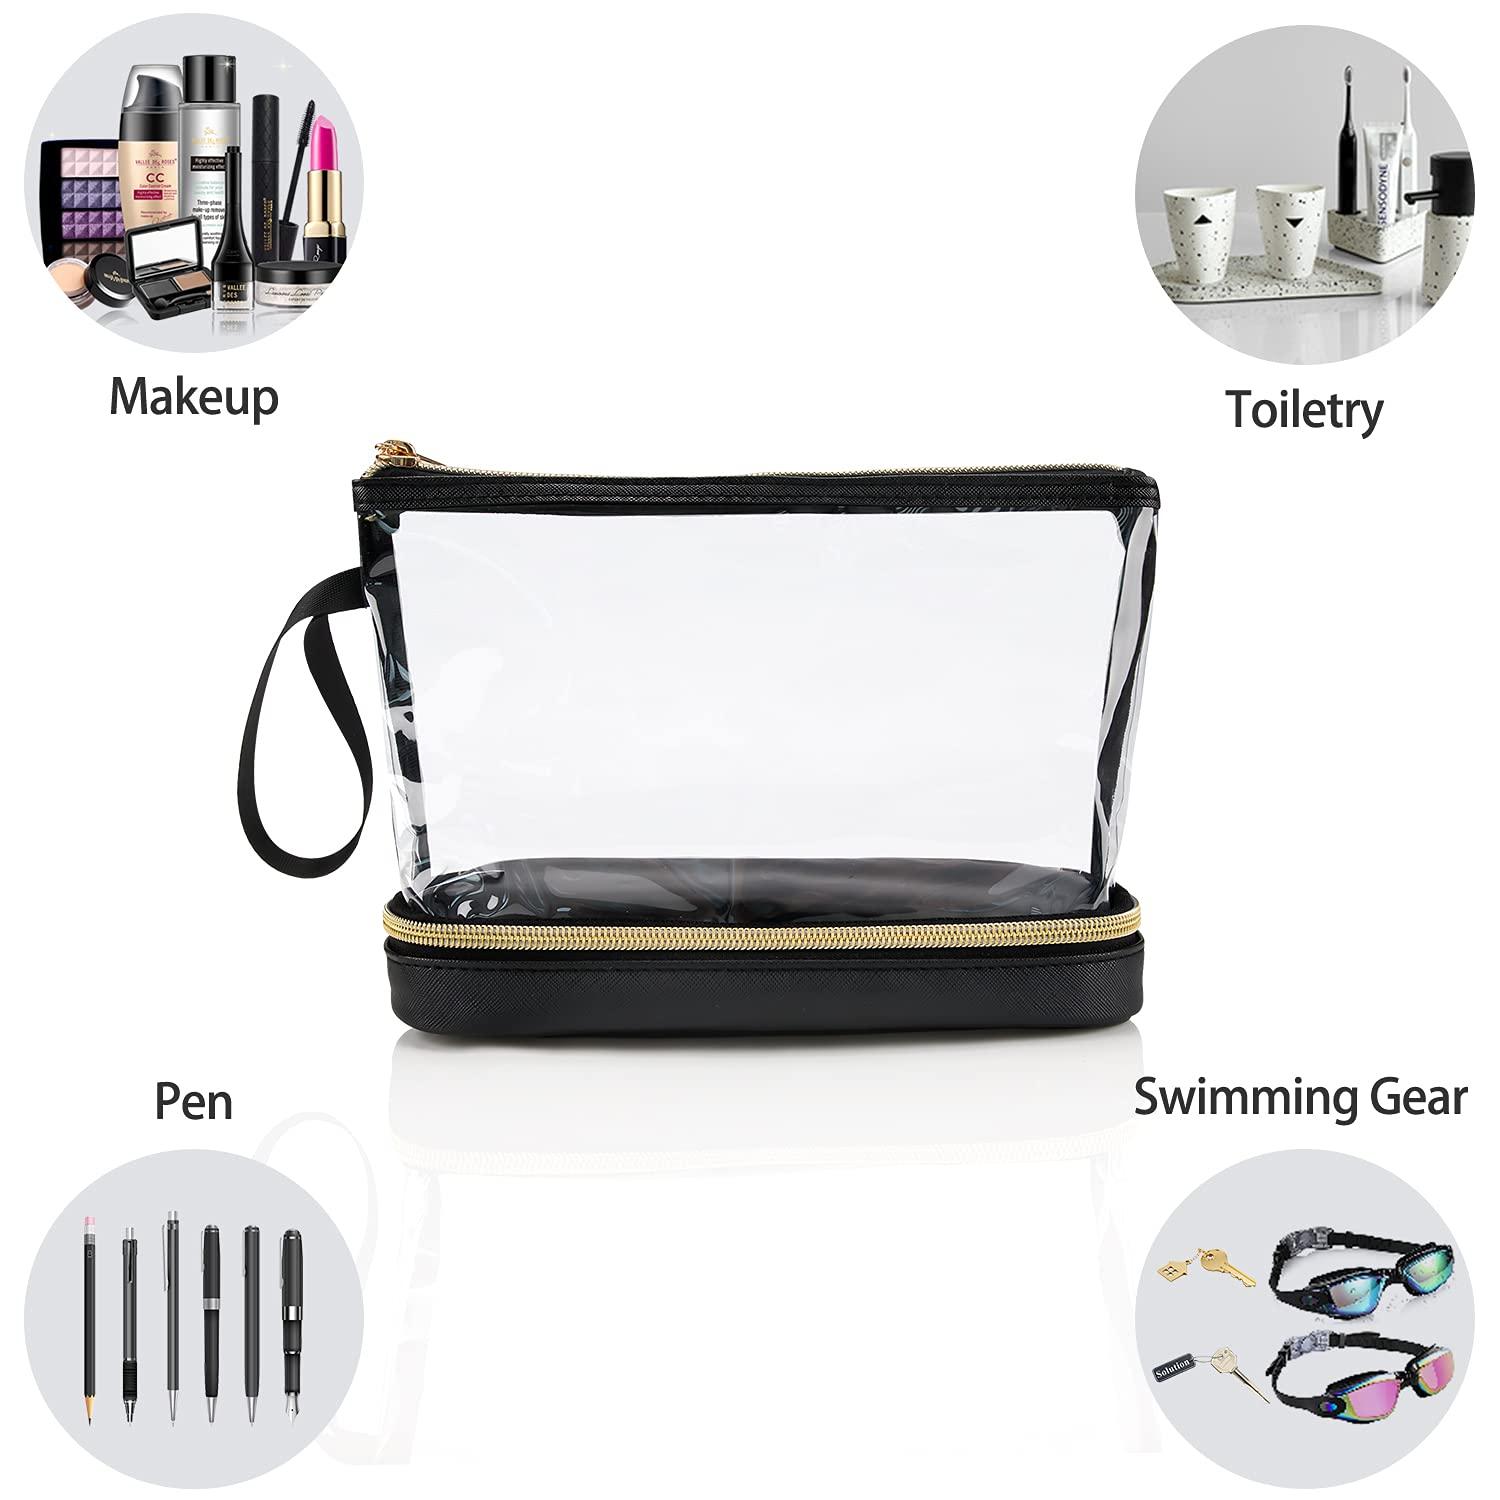  Ethereal Clear Makeup Bag, Light Grey Small Cosmetic Bag  Travel Makeup Bag for Women TSA Approved Toiletry Bag Portable Makeup Pouch  : Beauty & Personal Care